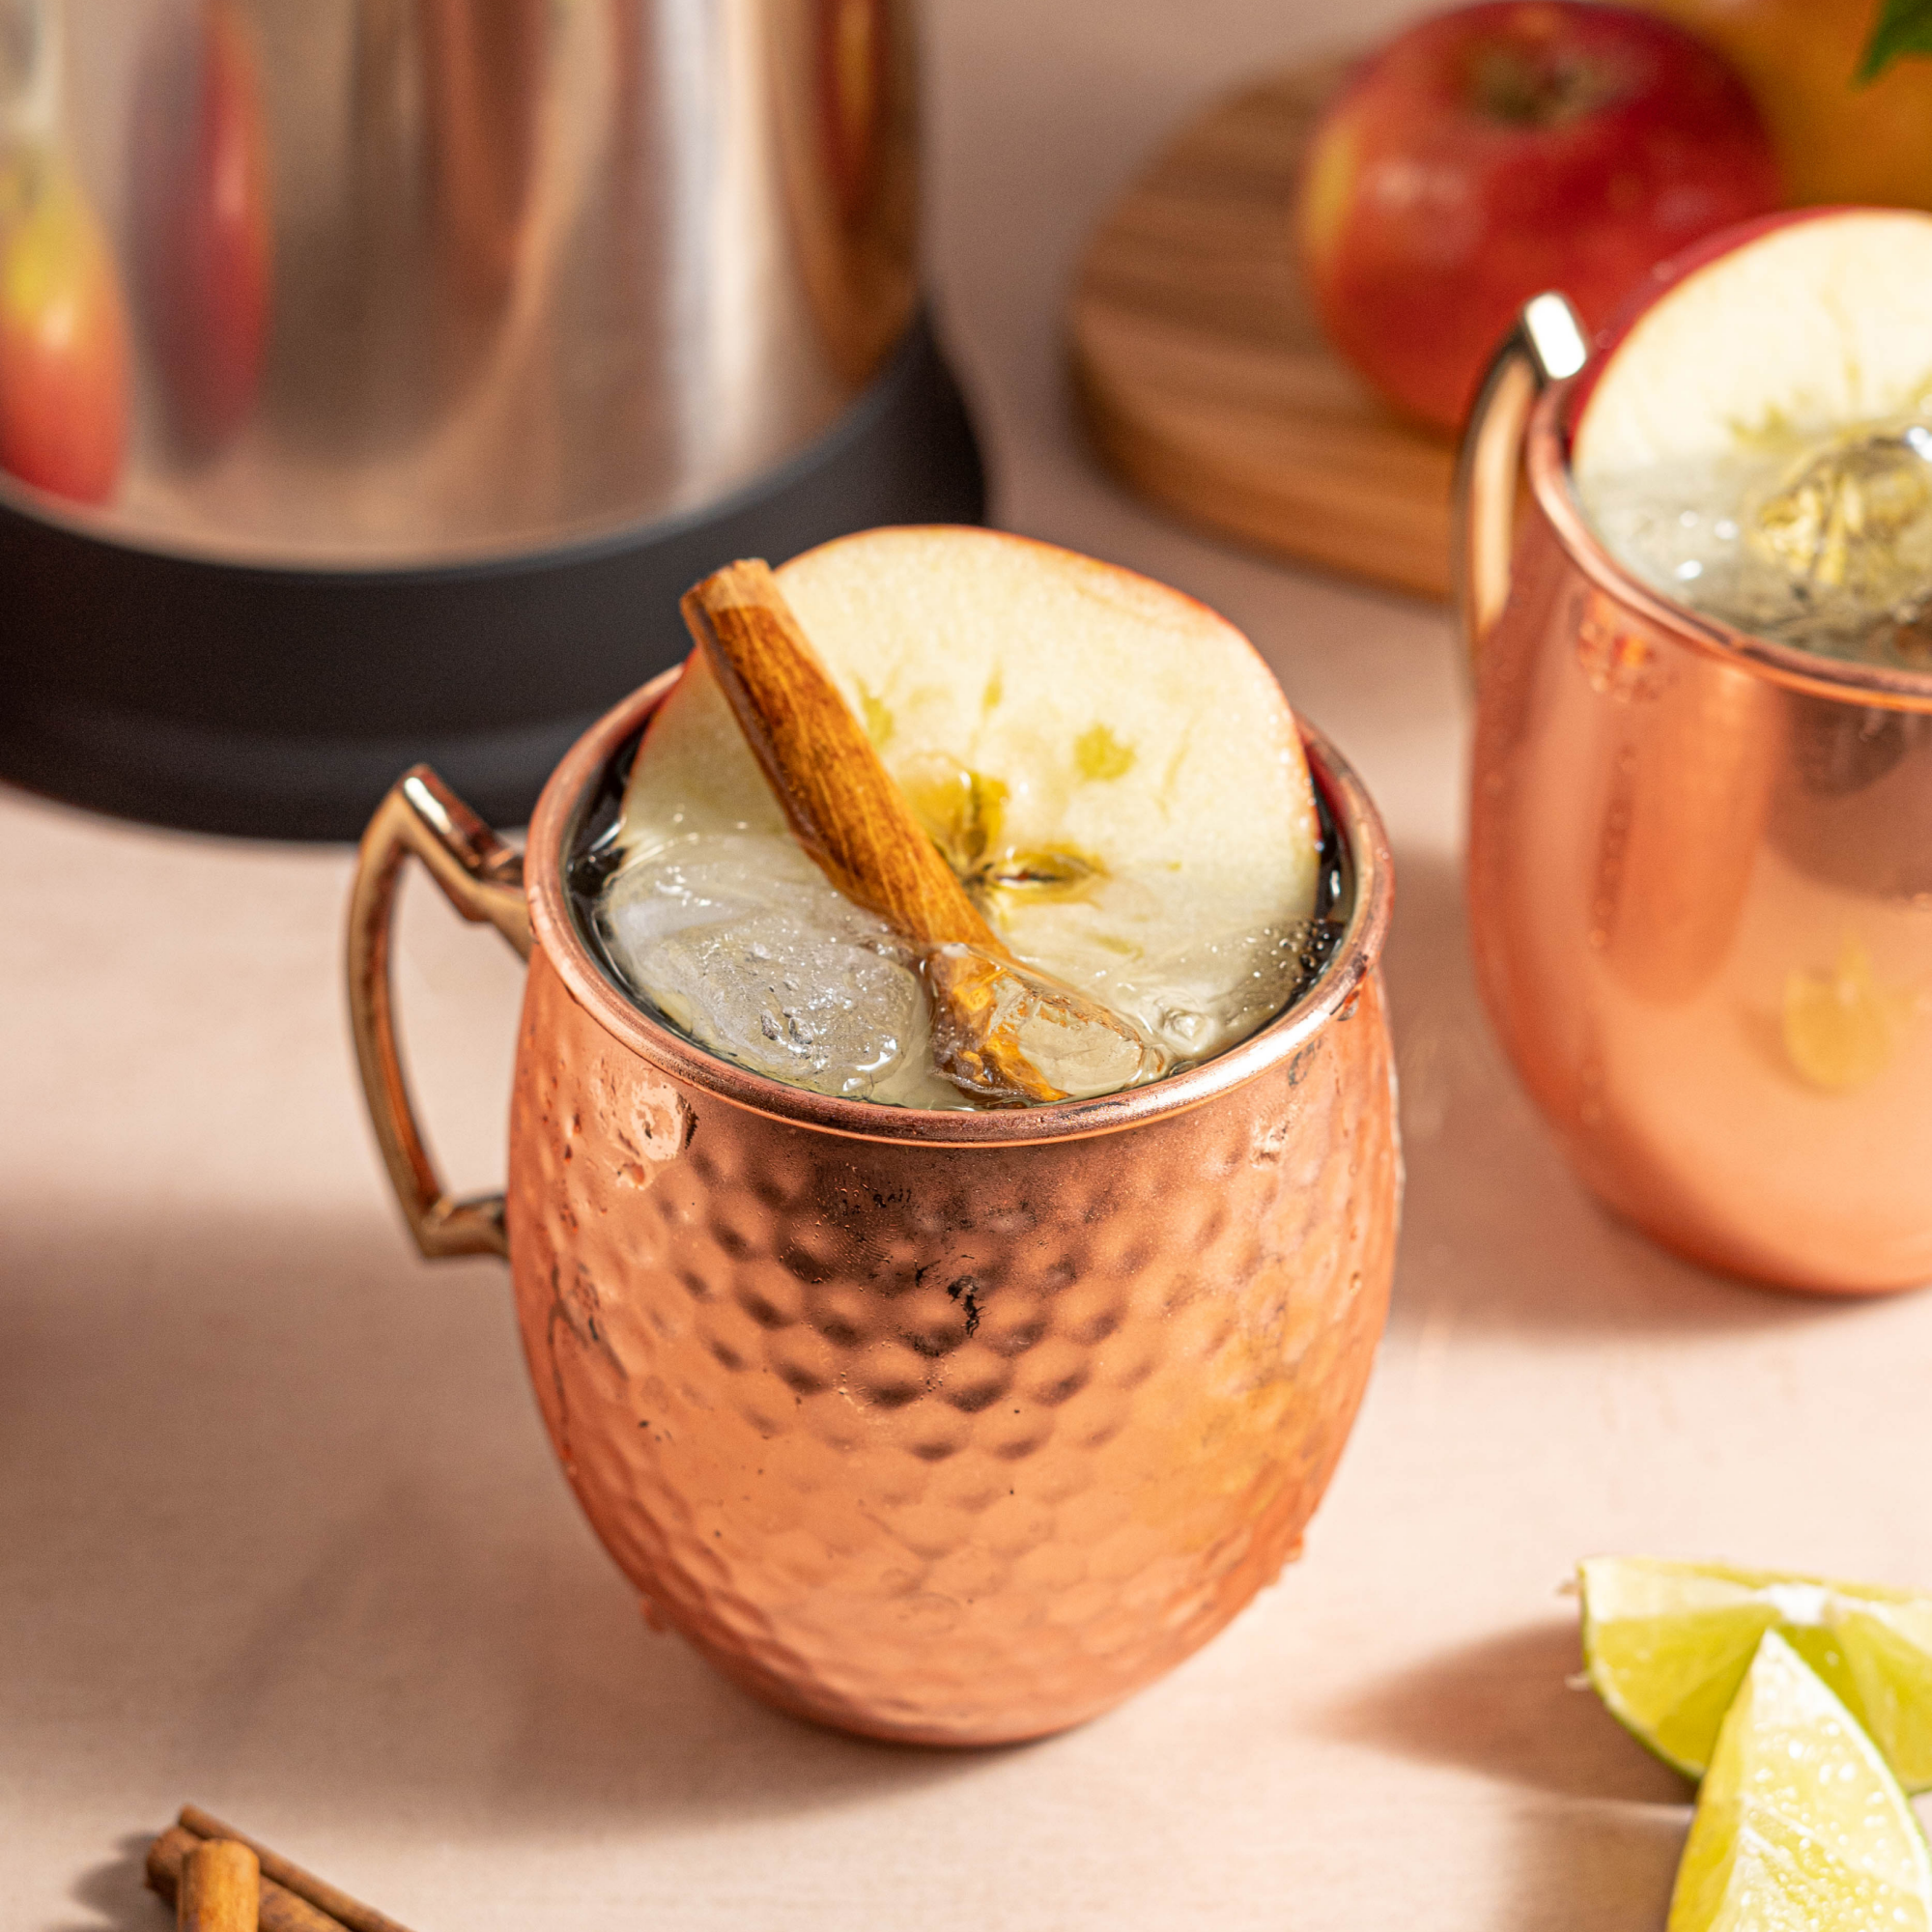 Mocktail Mule made in moments with the Almond Cow. Includes delicious flavors of ginger beer, cinnamon, apples and limes.